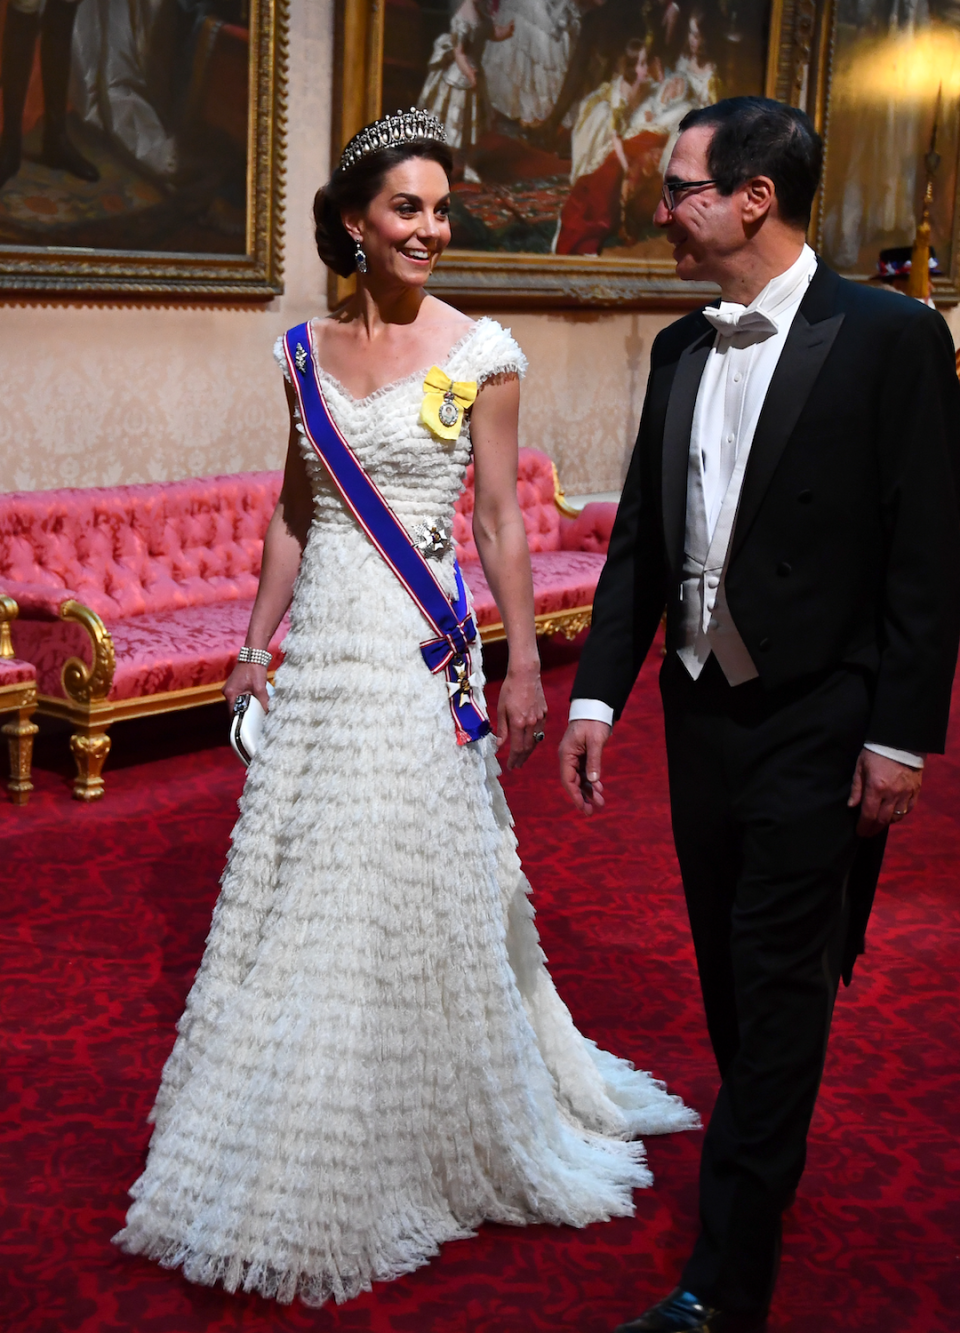 The duchess and the Lover's Knot Tiara in 2019